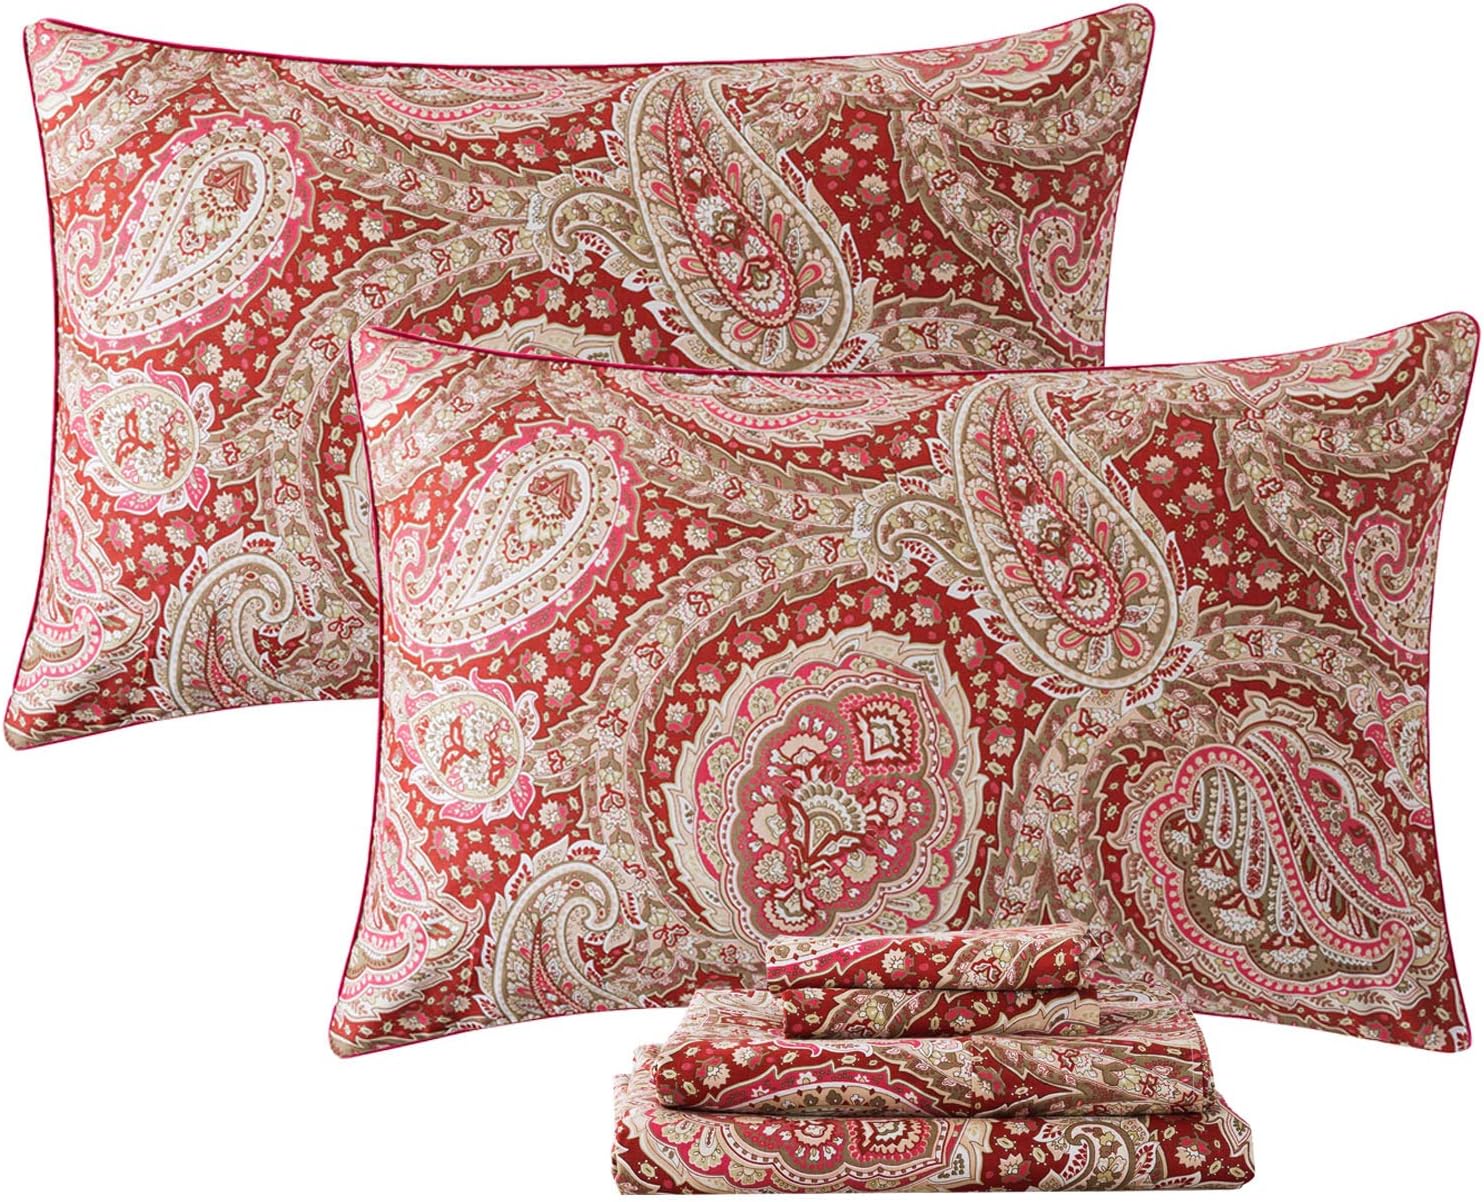 FADFAY Luxury Paisley Sheets Set Twin Classy Red and Gold Floral Farmhouse Bedding Elegent Red Paisley Bedding Set 100% Cotton Super Soft Hypoallergenic Deep Pocket Fitted Sheet 4-Pieces, Twin Size